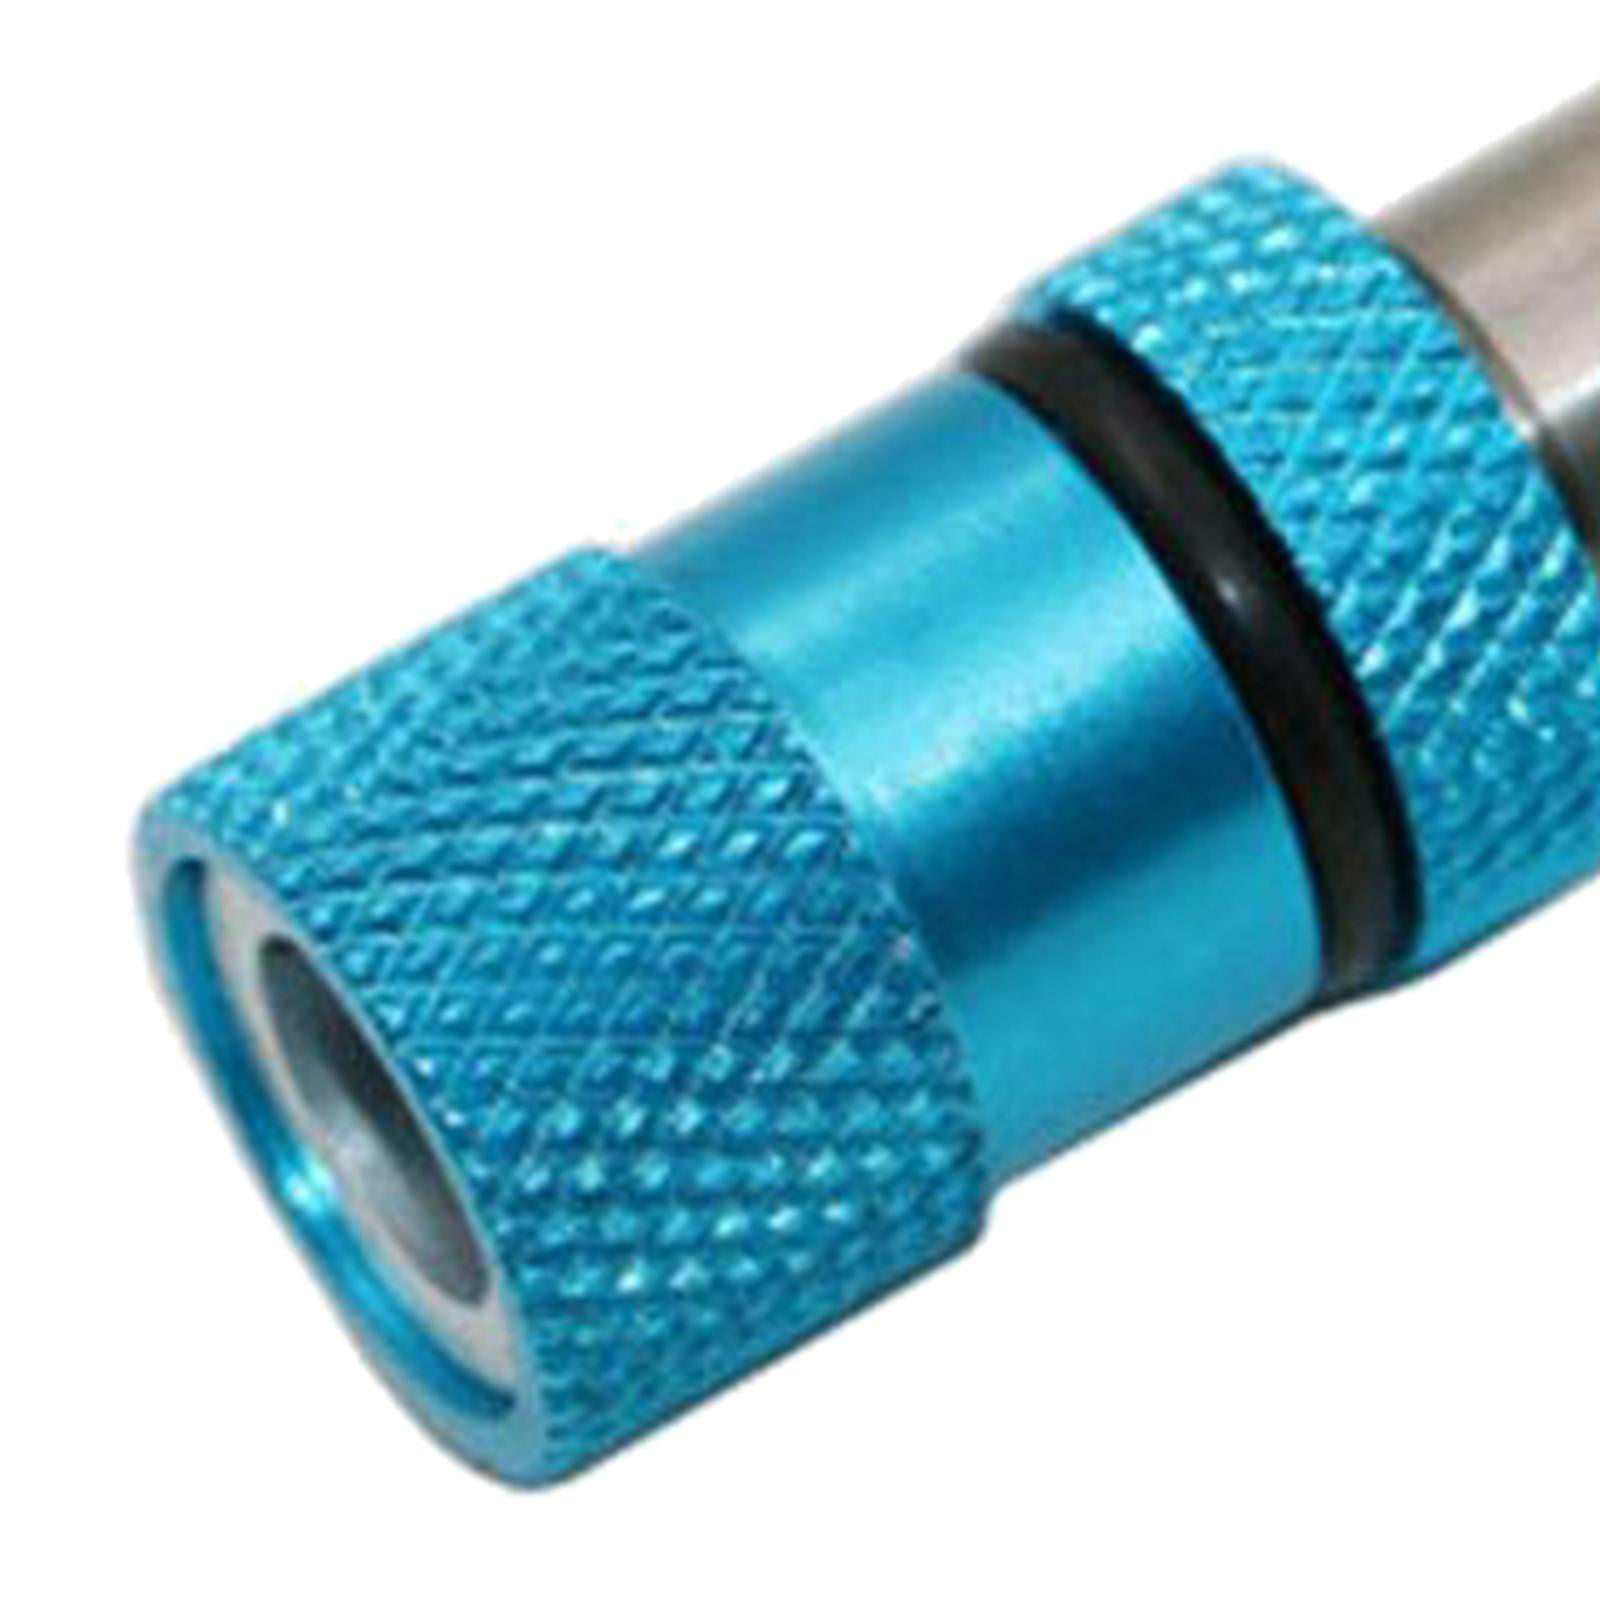 Details about   1pc 1/4 Inch Hex Shank Magnetic Chuck Adapter Quick Release Screwdriver Bit 